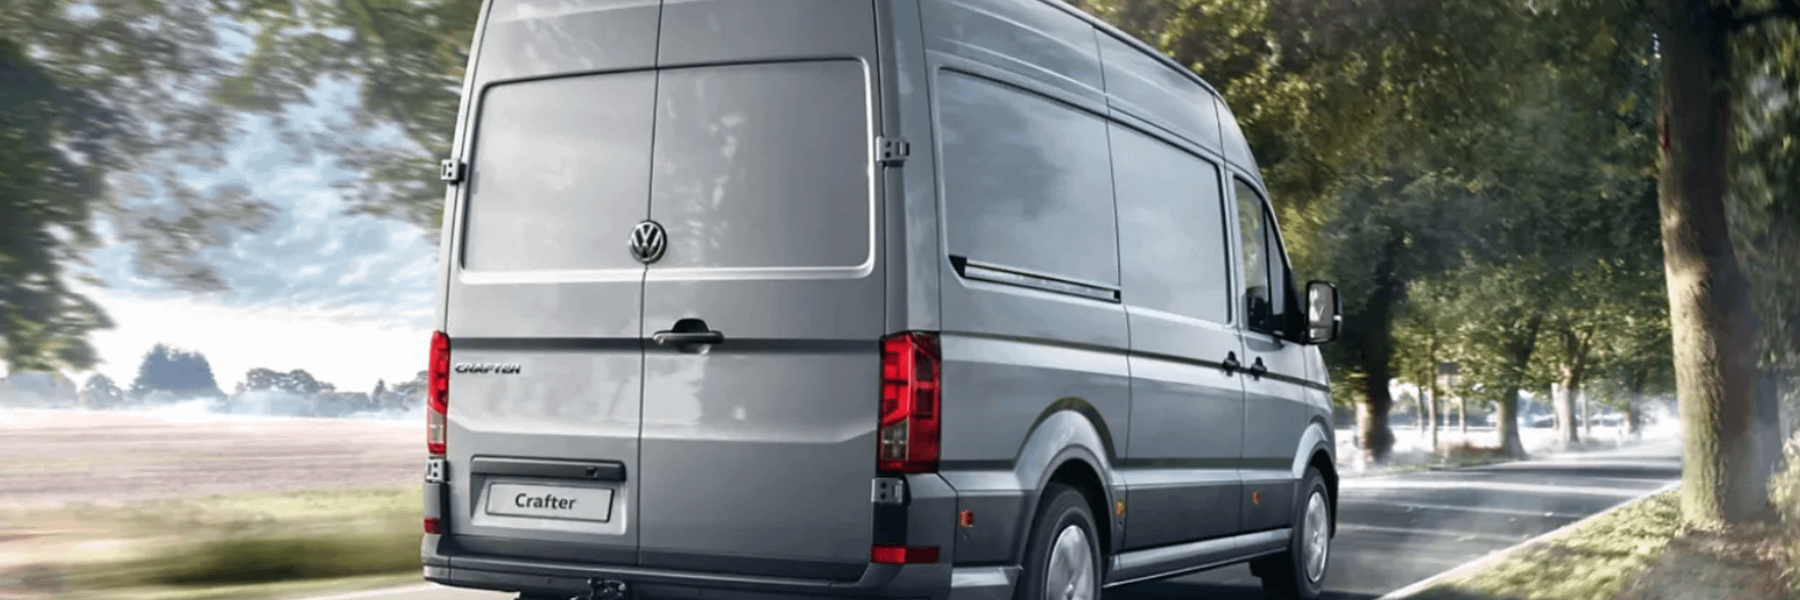 Ultimate Guide] Commercial Work Vans With High Resale Value